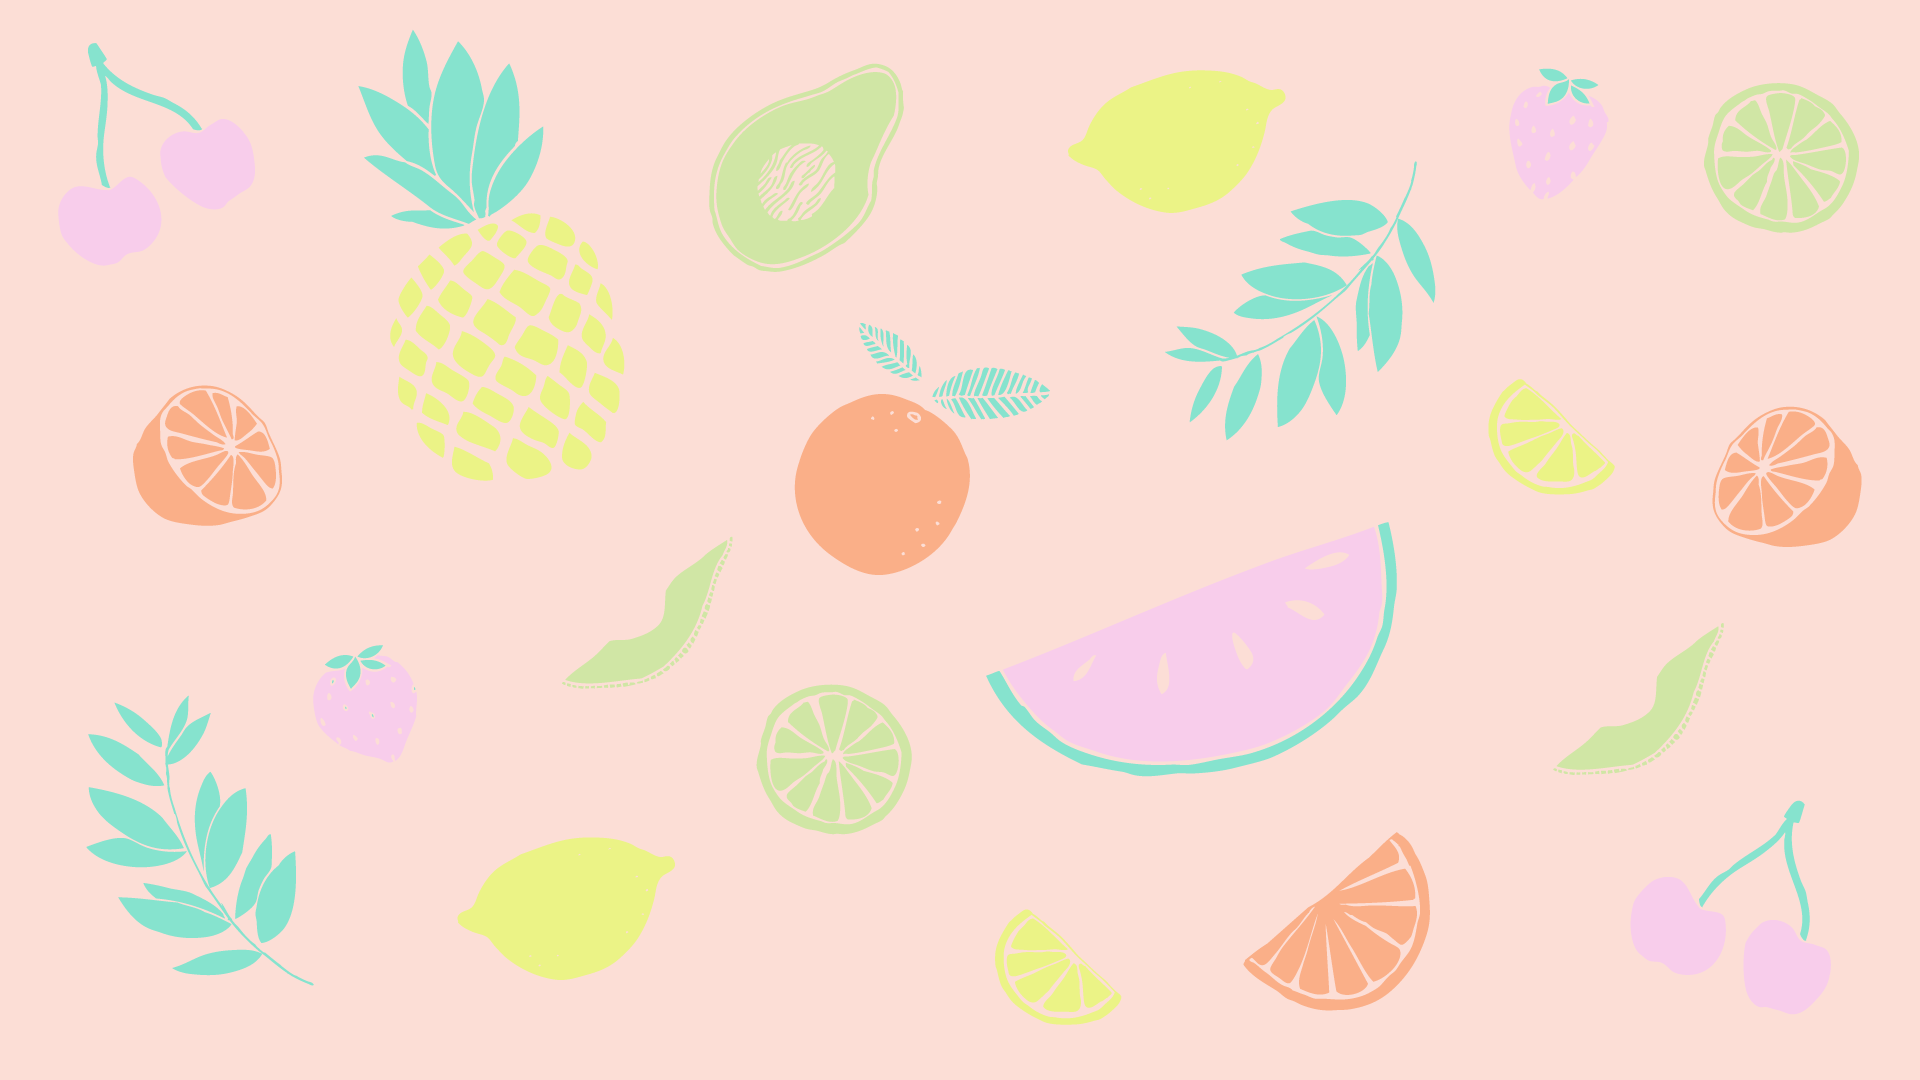 Fruit Desktop Wallpapers posted by Samantha Tremblay.